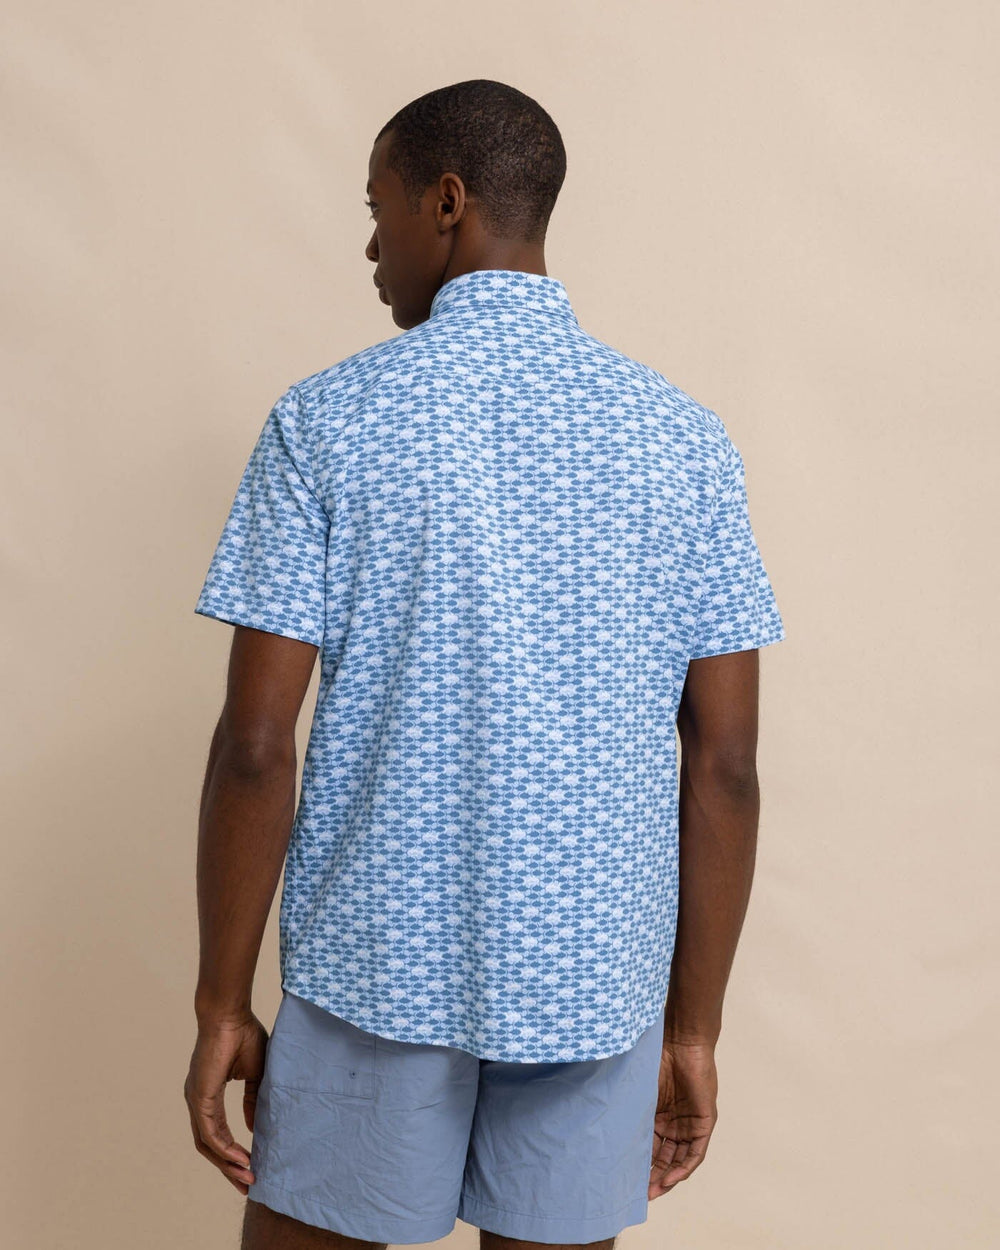 The back view of the Southern Tide Intercoastal Heather Skipping Jacks Short Sleeve Sport Shirt by Southern Tide - Heather Clearwater Blue